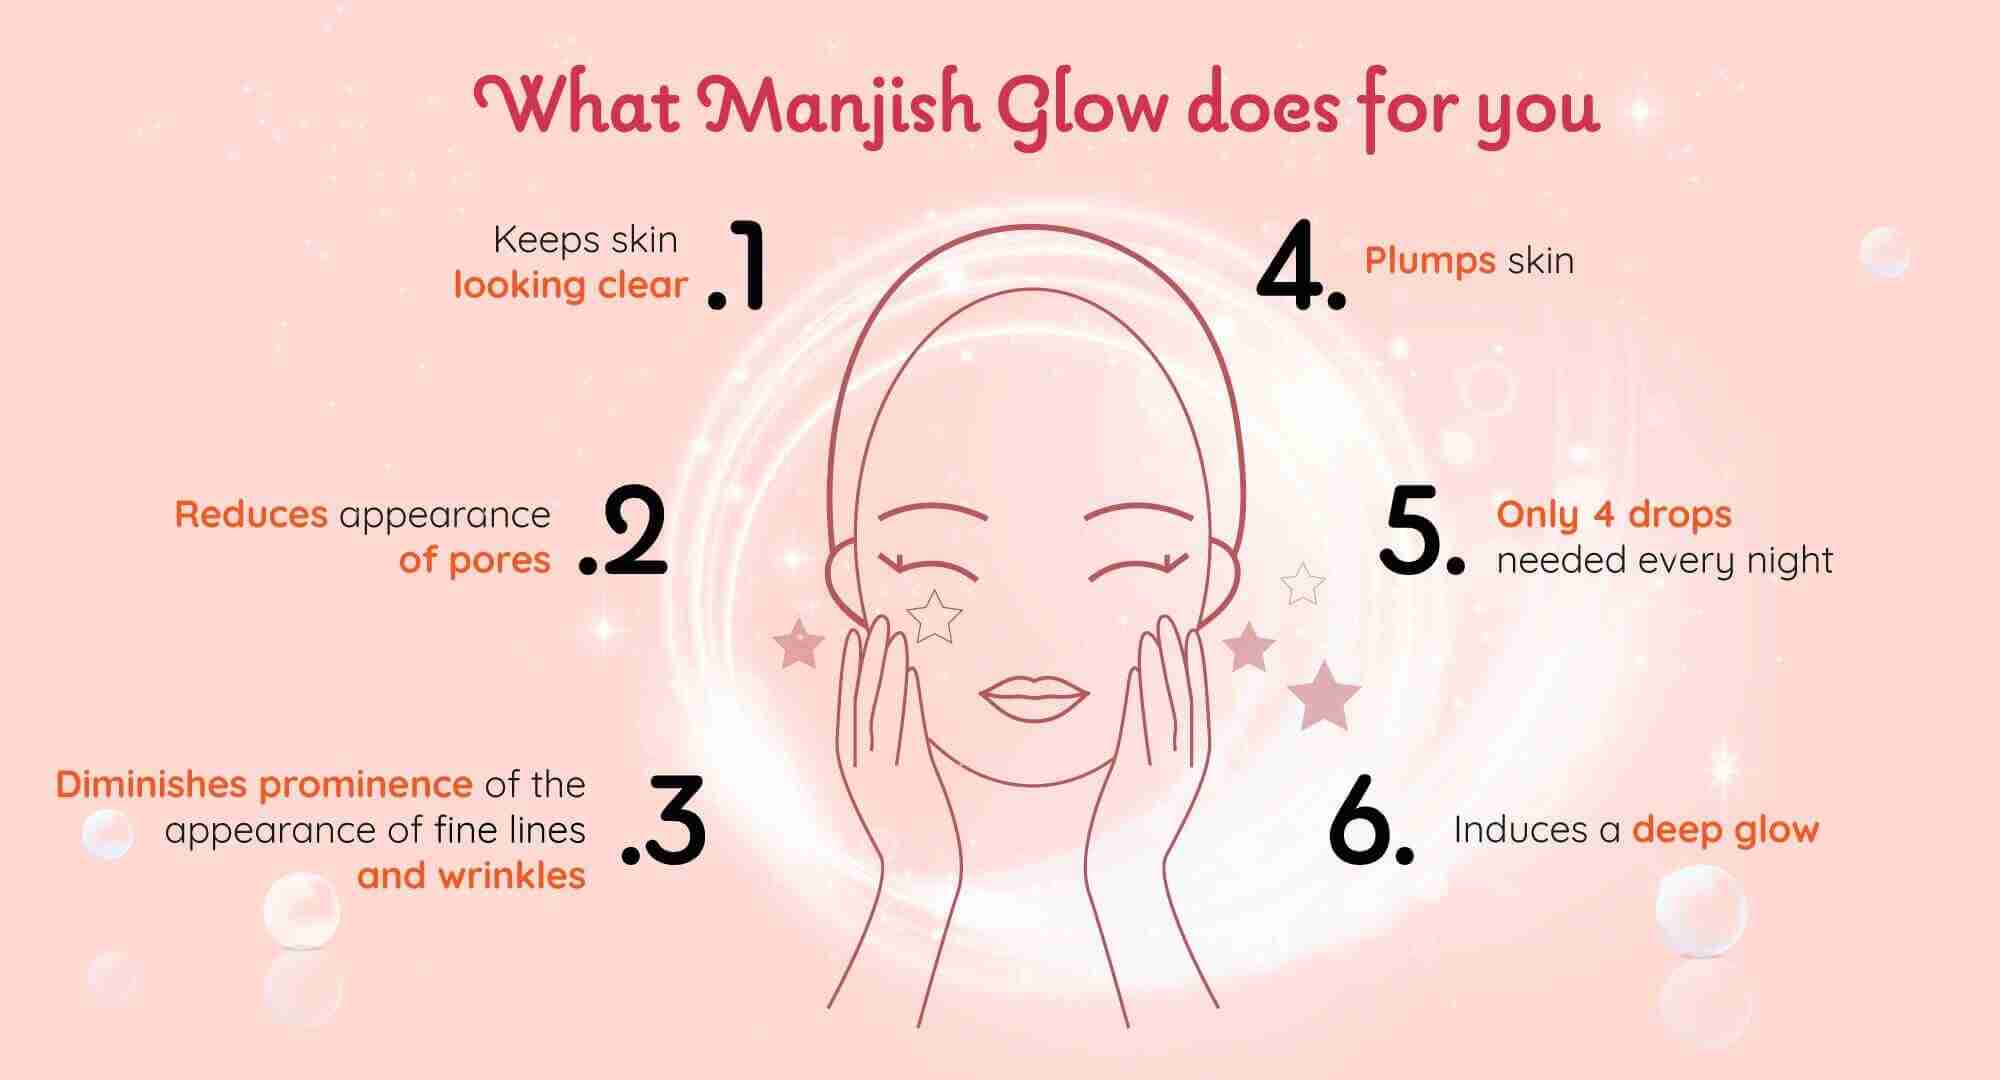 What Manjish Glow Does For you: 1. Keeps skin looking clear 2. Reduces appearance of pores 3. Diminishes appearance of fine lines and wrinkles 4. Plumps skin 5. Only 4 drops needed every night 6. Induces a deep glow